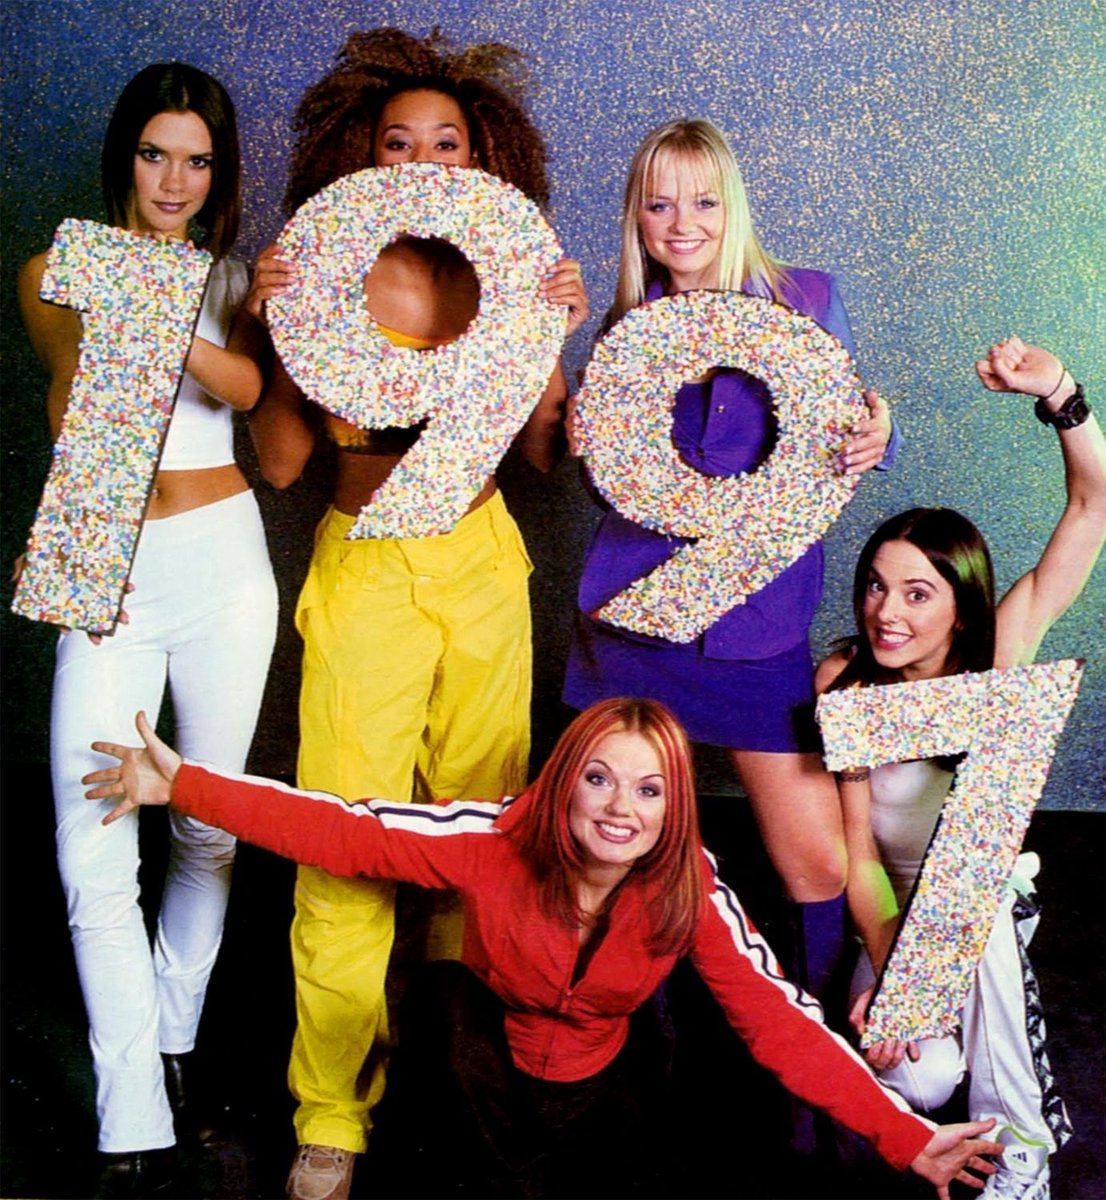 When asked about the term 'Girl Power' in 1997, Scary Spice said: "It's about spreading a positive vibe, kicking it for the girls… It's not about picking up guys. We don't need men to control our life. We control our lives anyway."